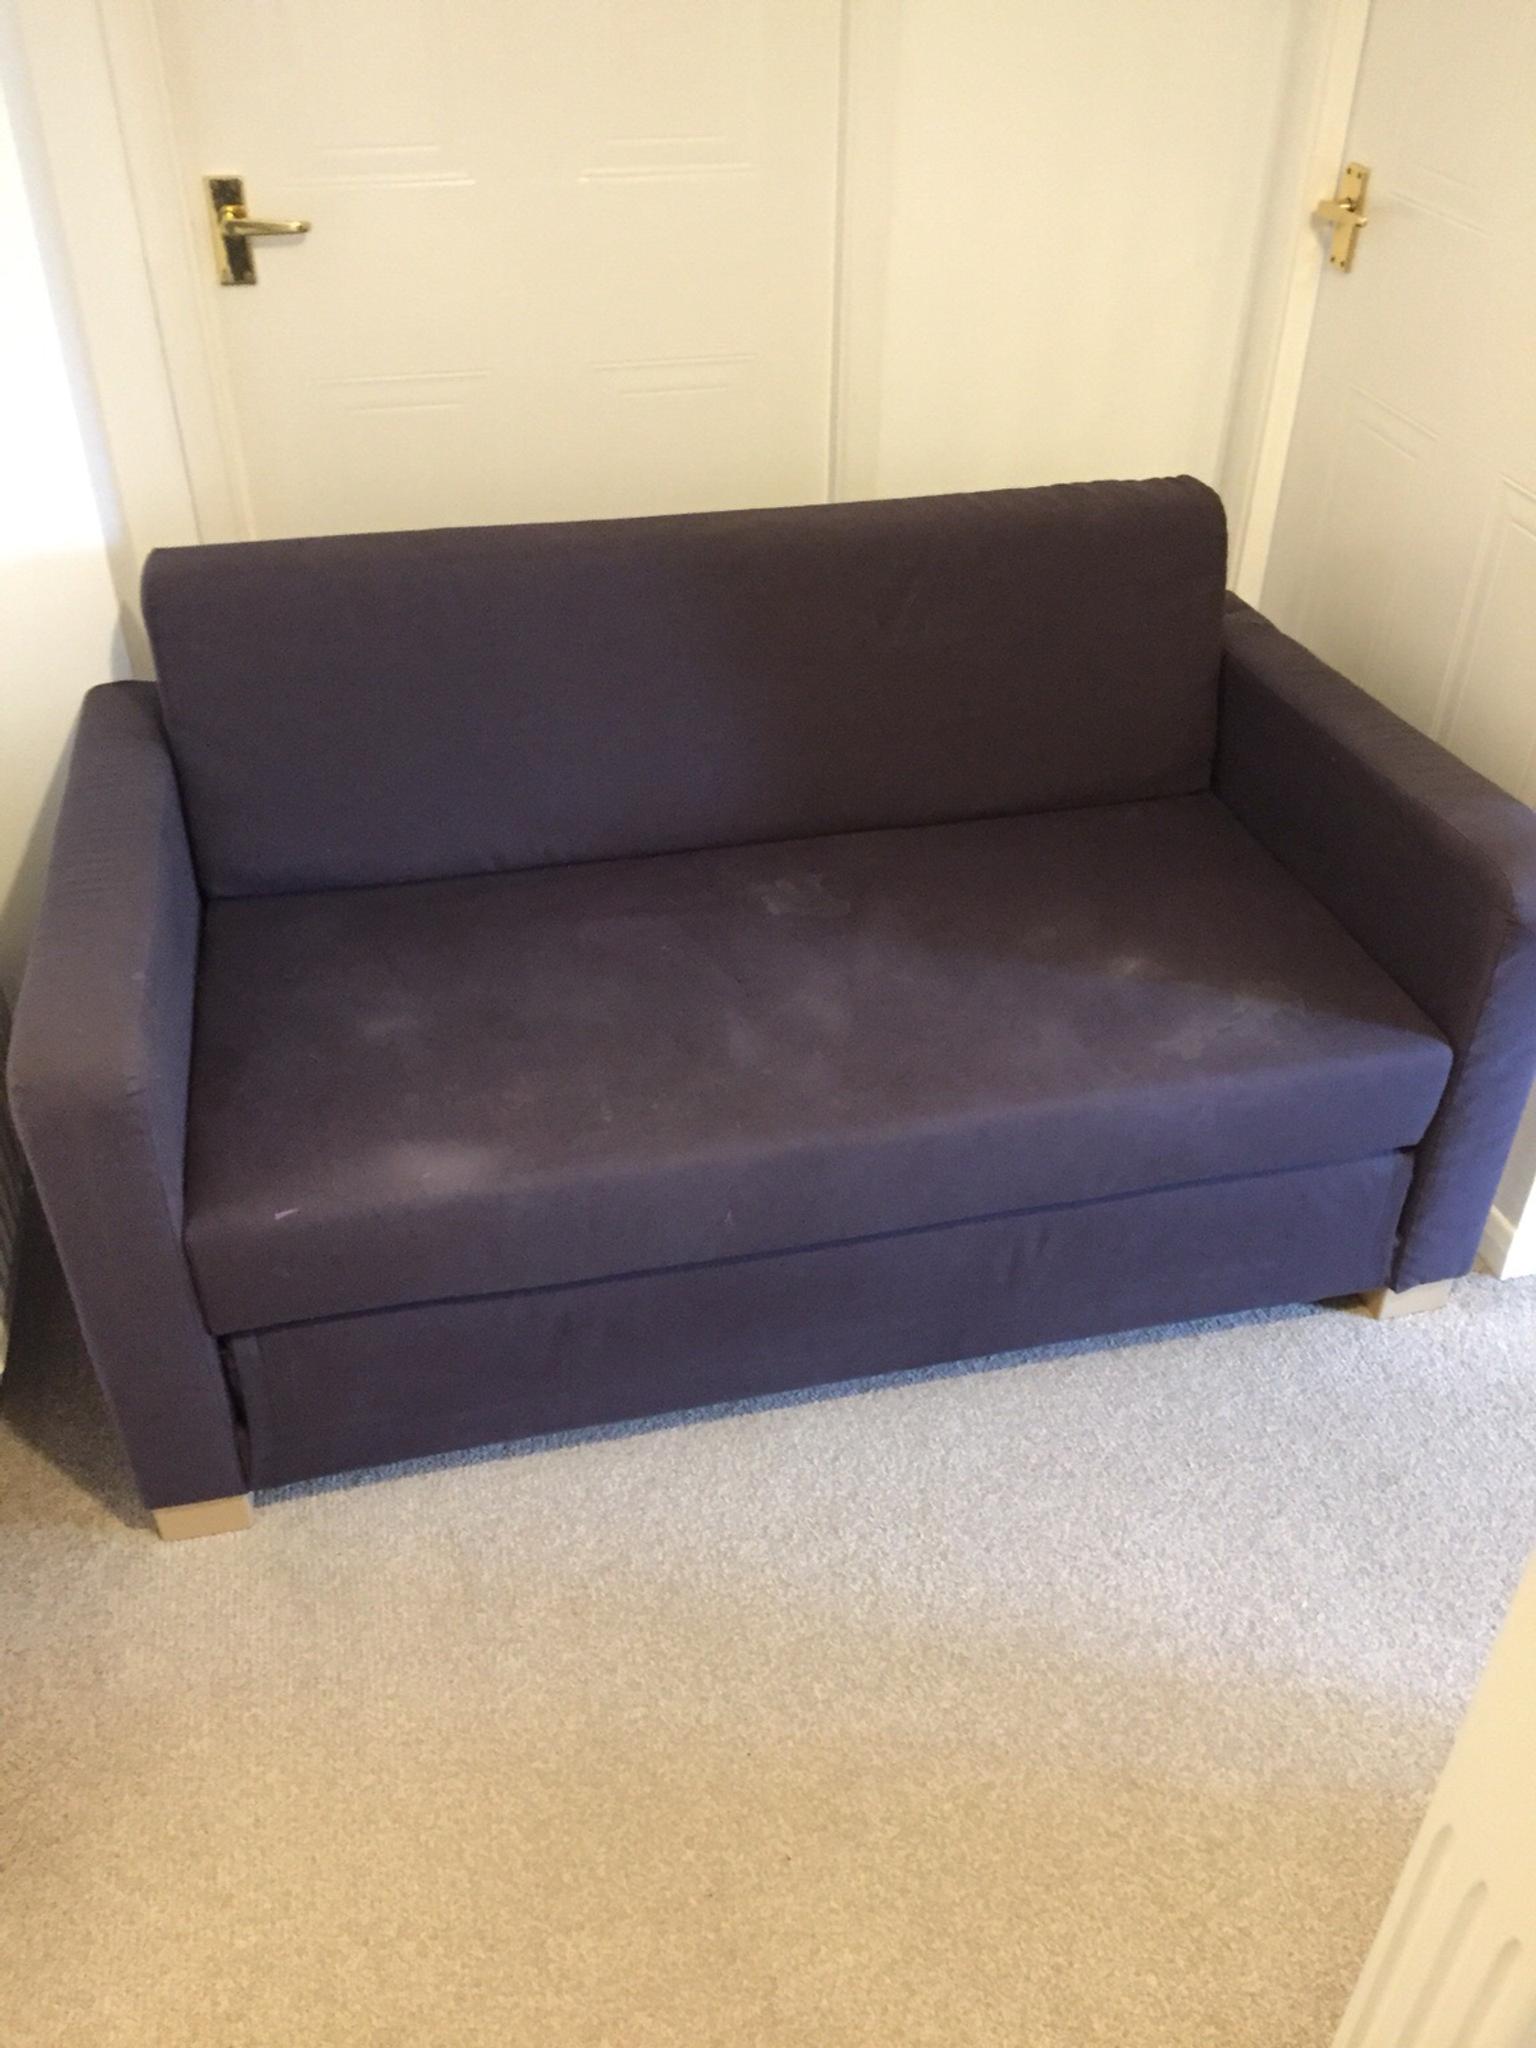 Ikea Sofa Bed In North West Leicestershire For 40 00 For Sale